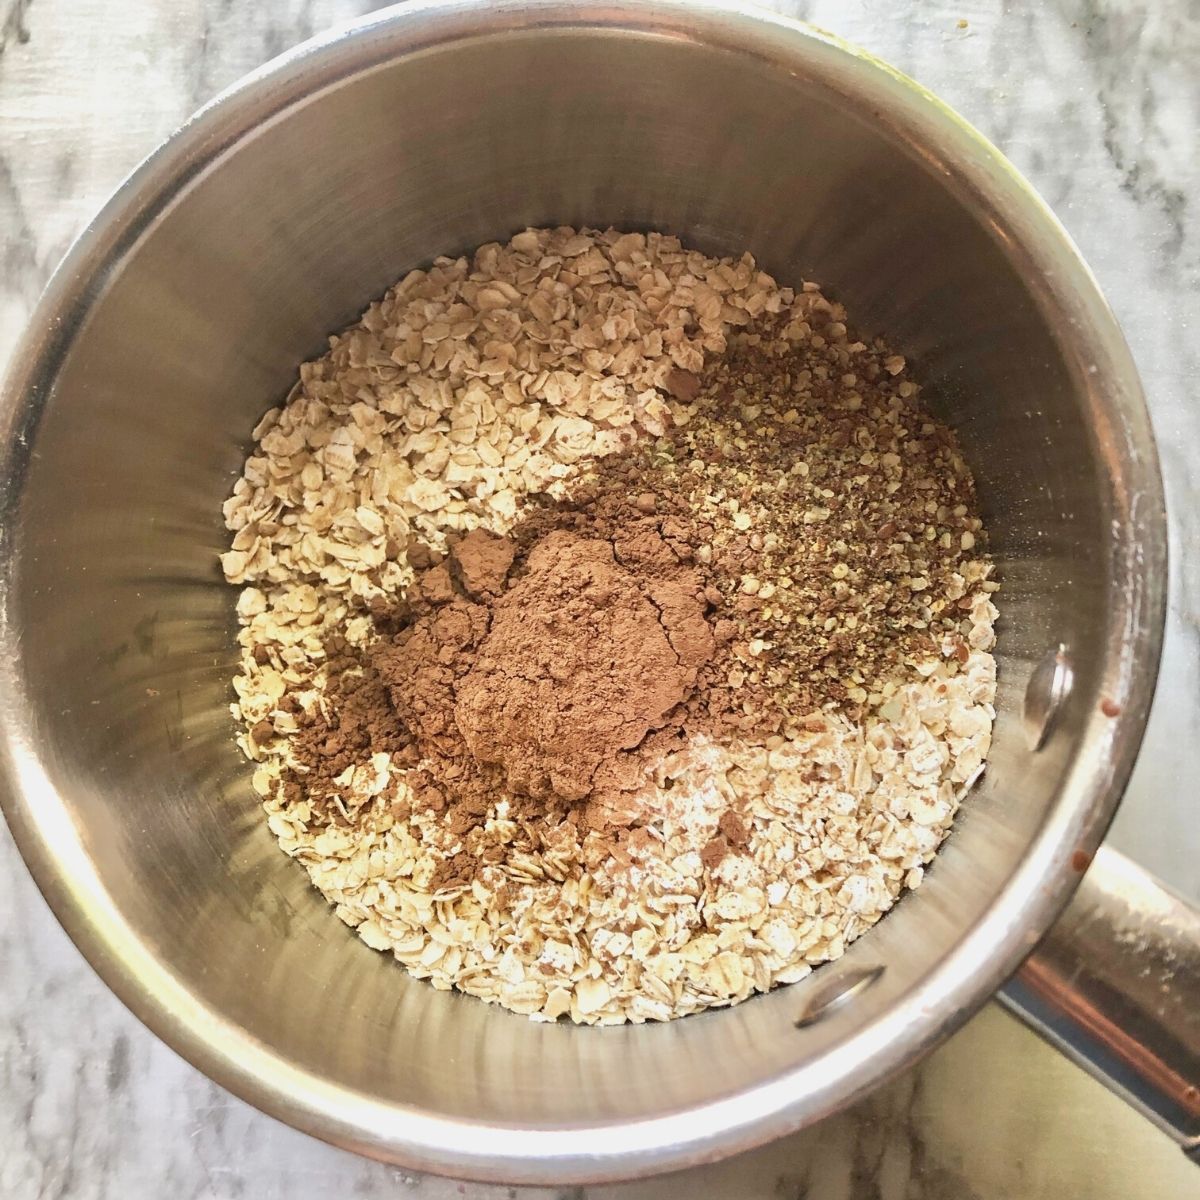 oats, flax/hemp seed, and cocoa powder in a sauce pan